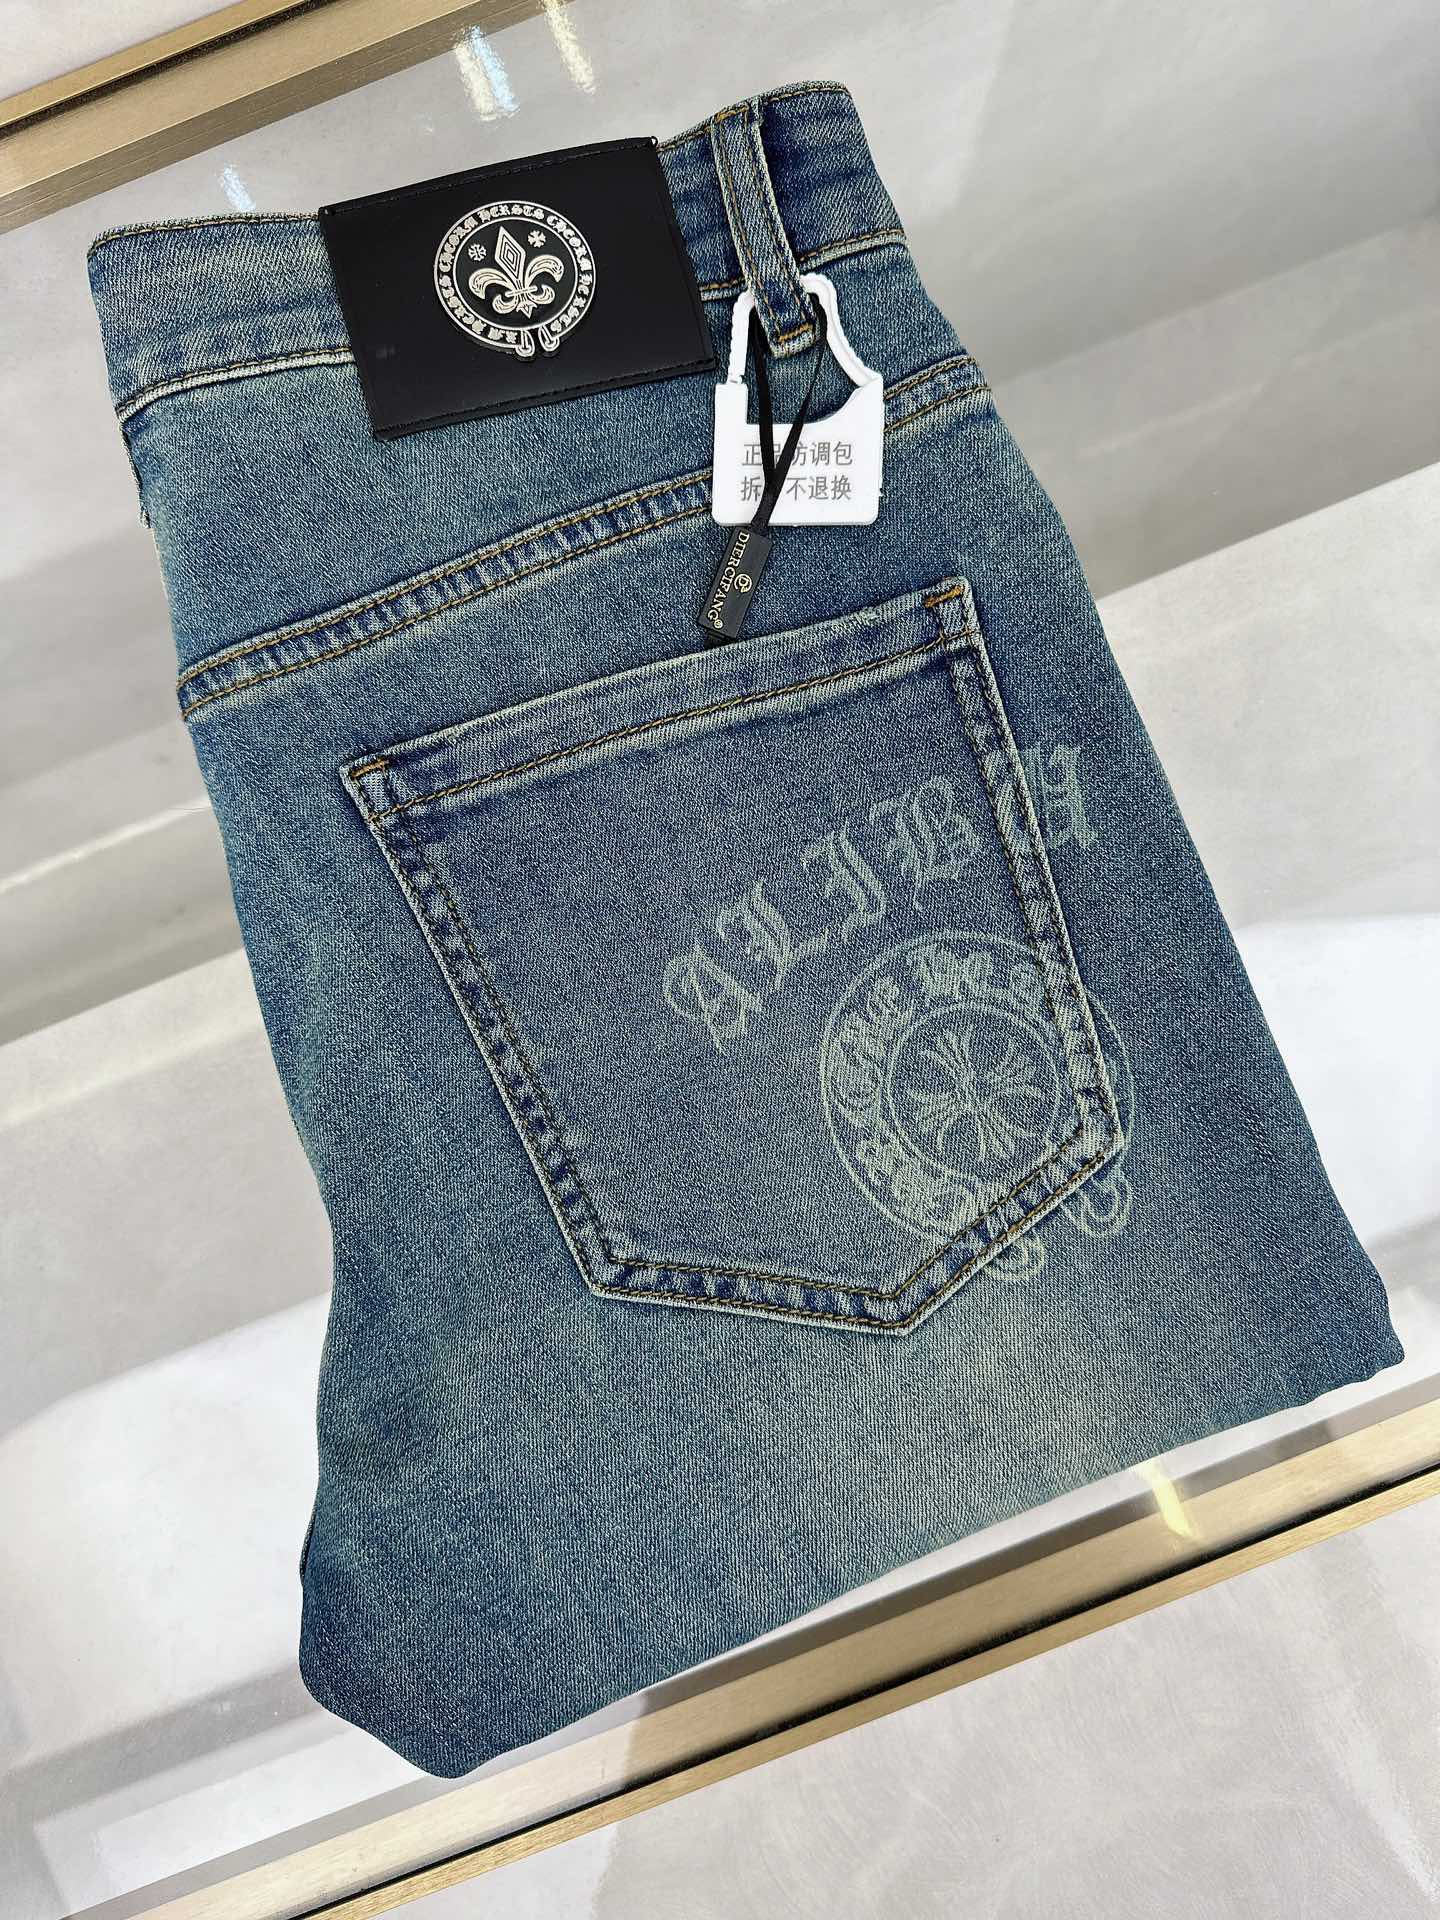 Chrome Hearts Clothing Jeans Fall Collection